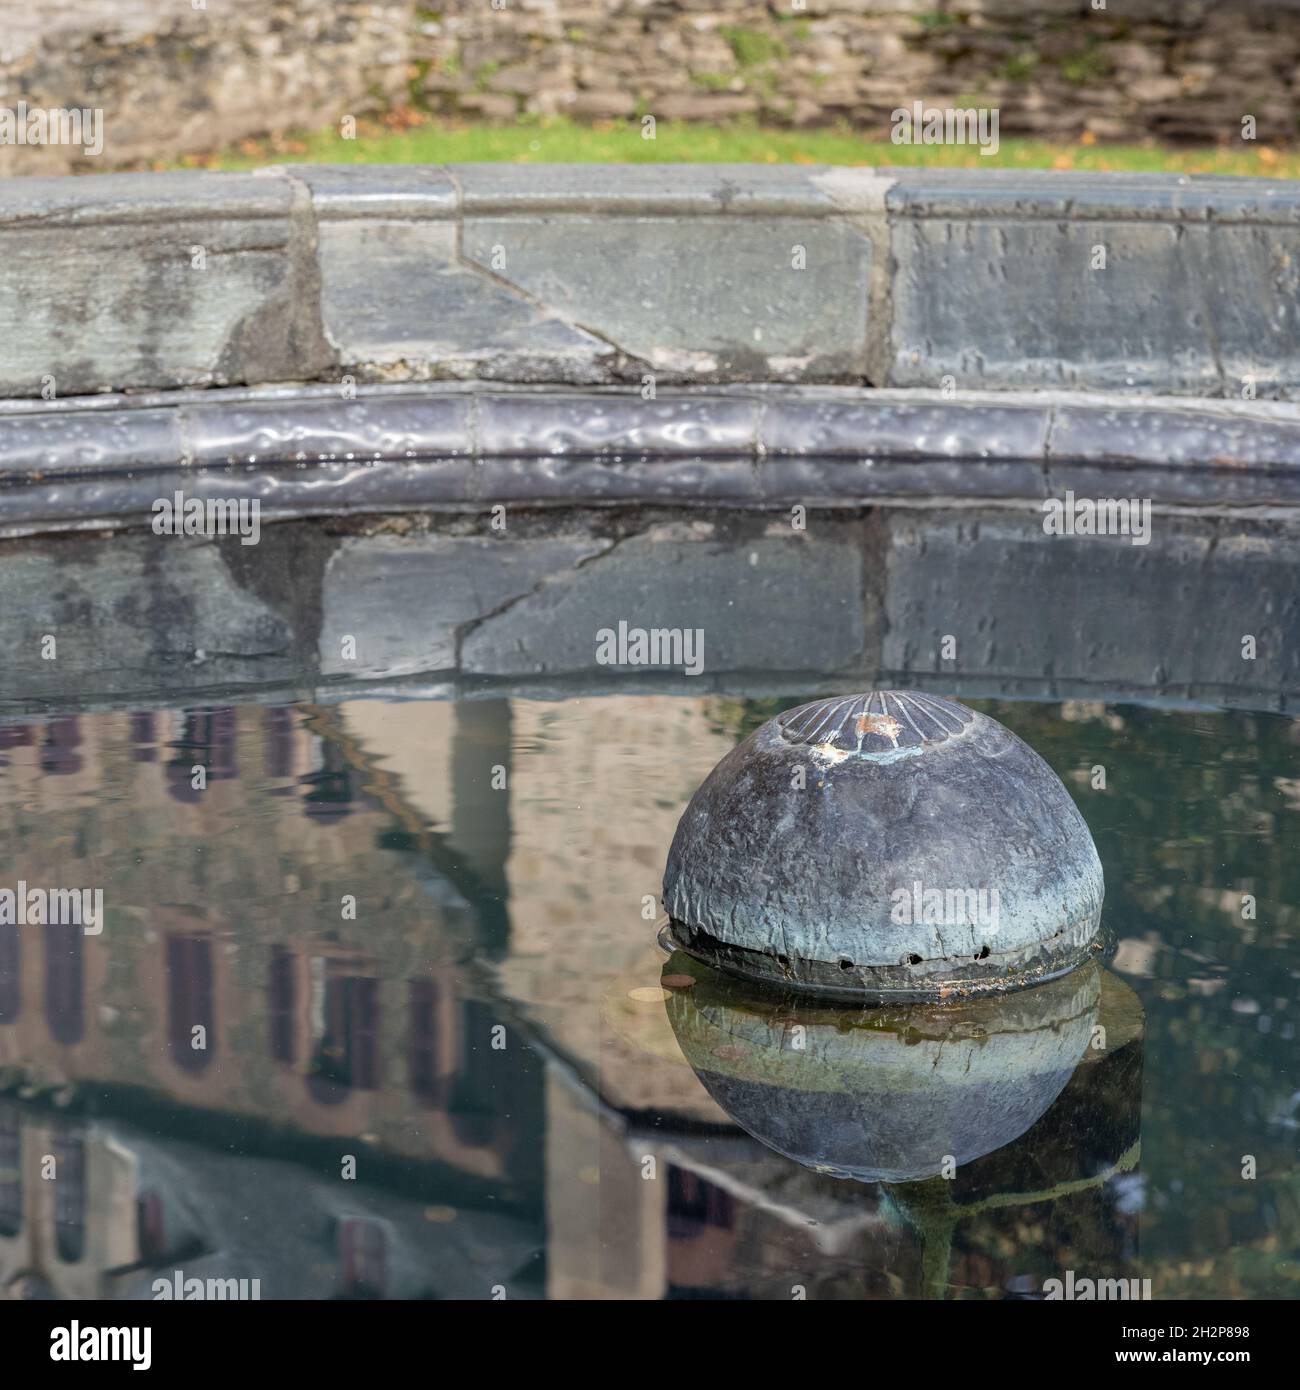 Reflection of Abbey of Ste Foy in basin of cloister fountain, Conques, Aveyron, France Stock Photo